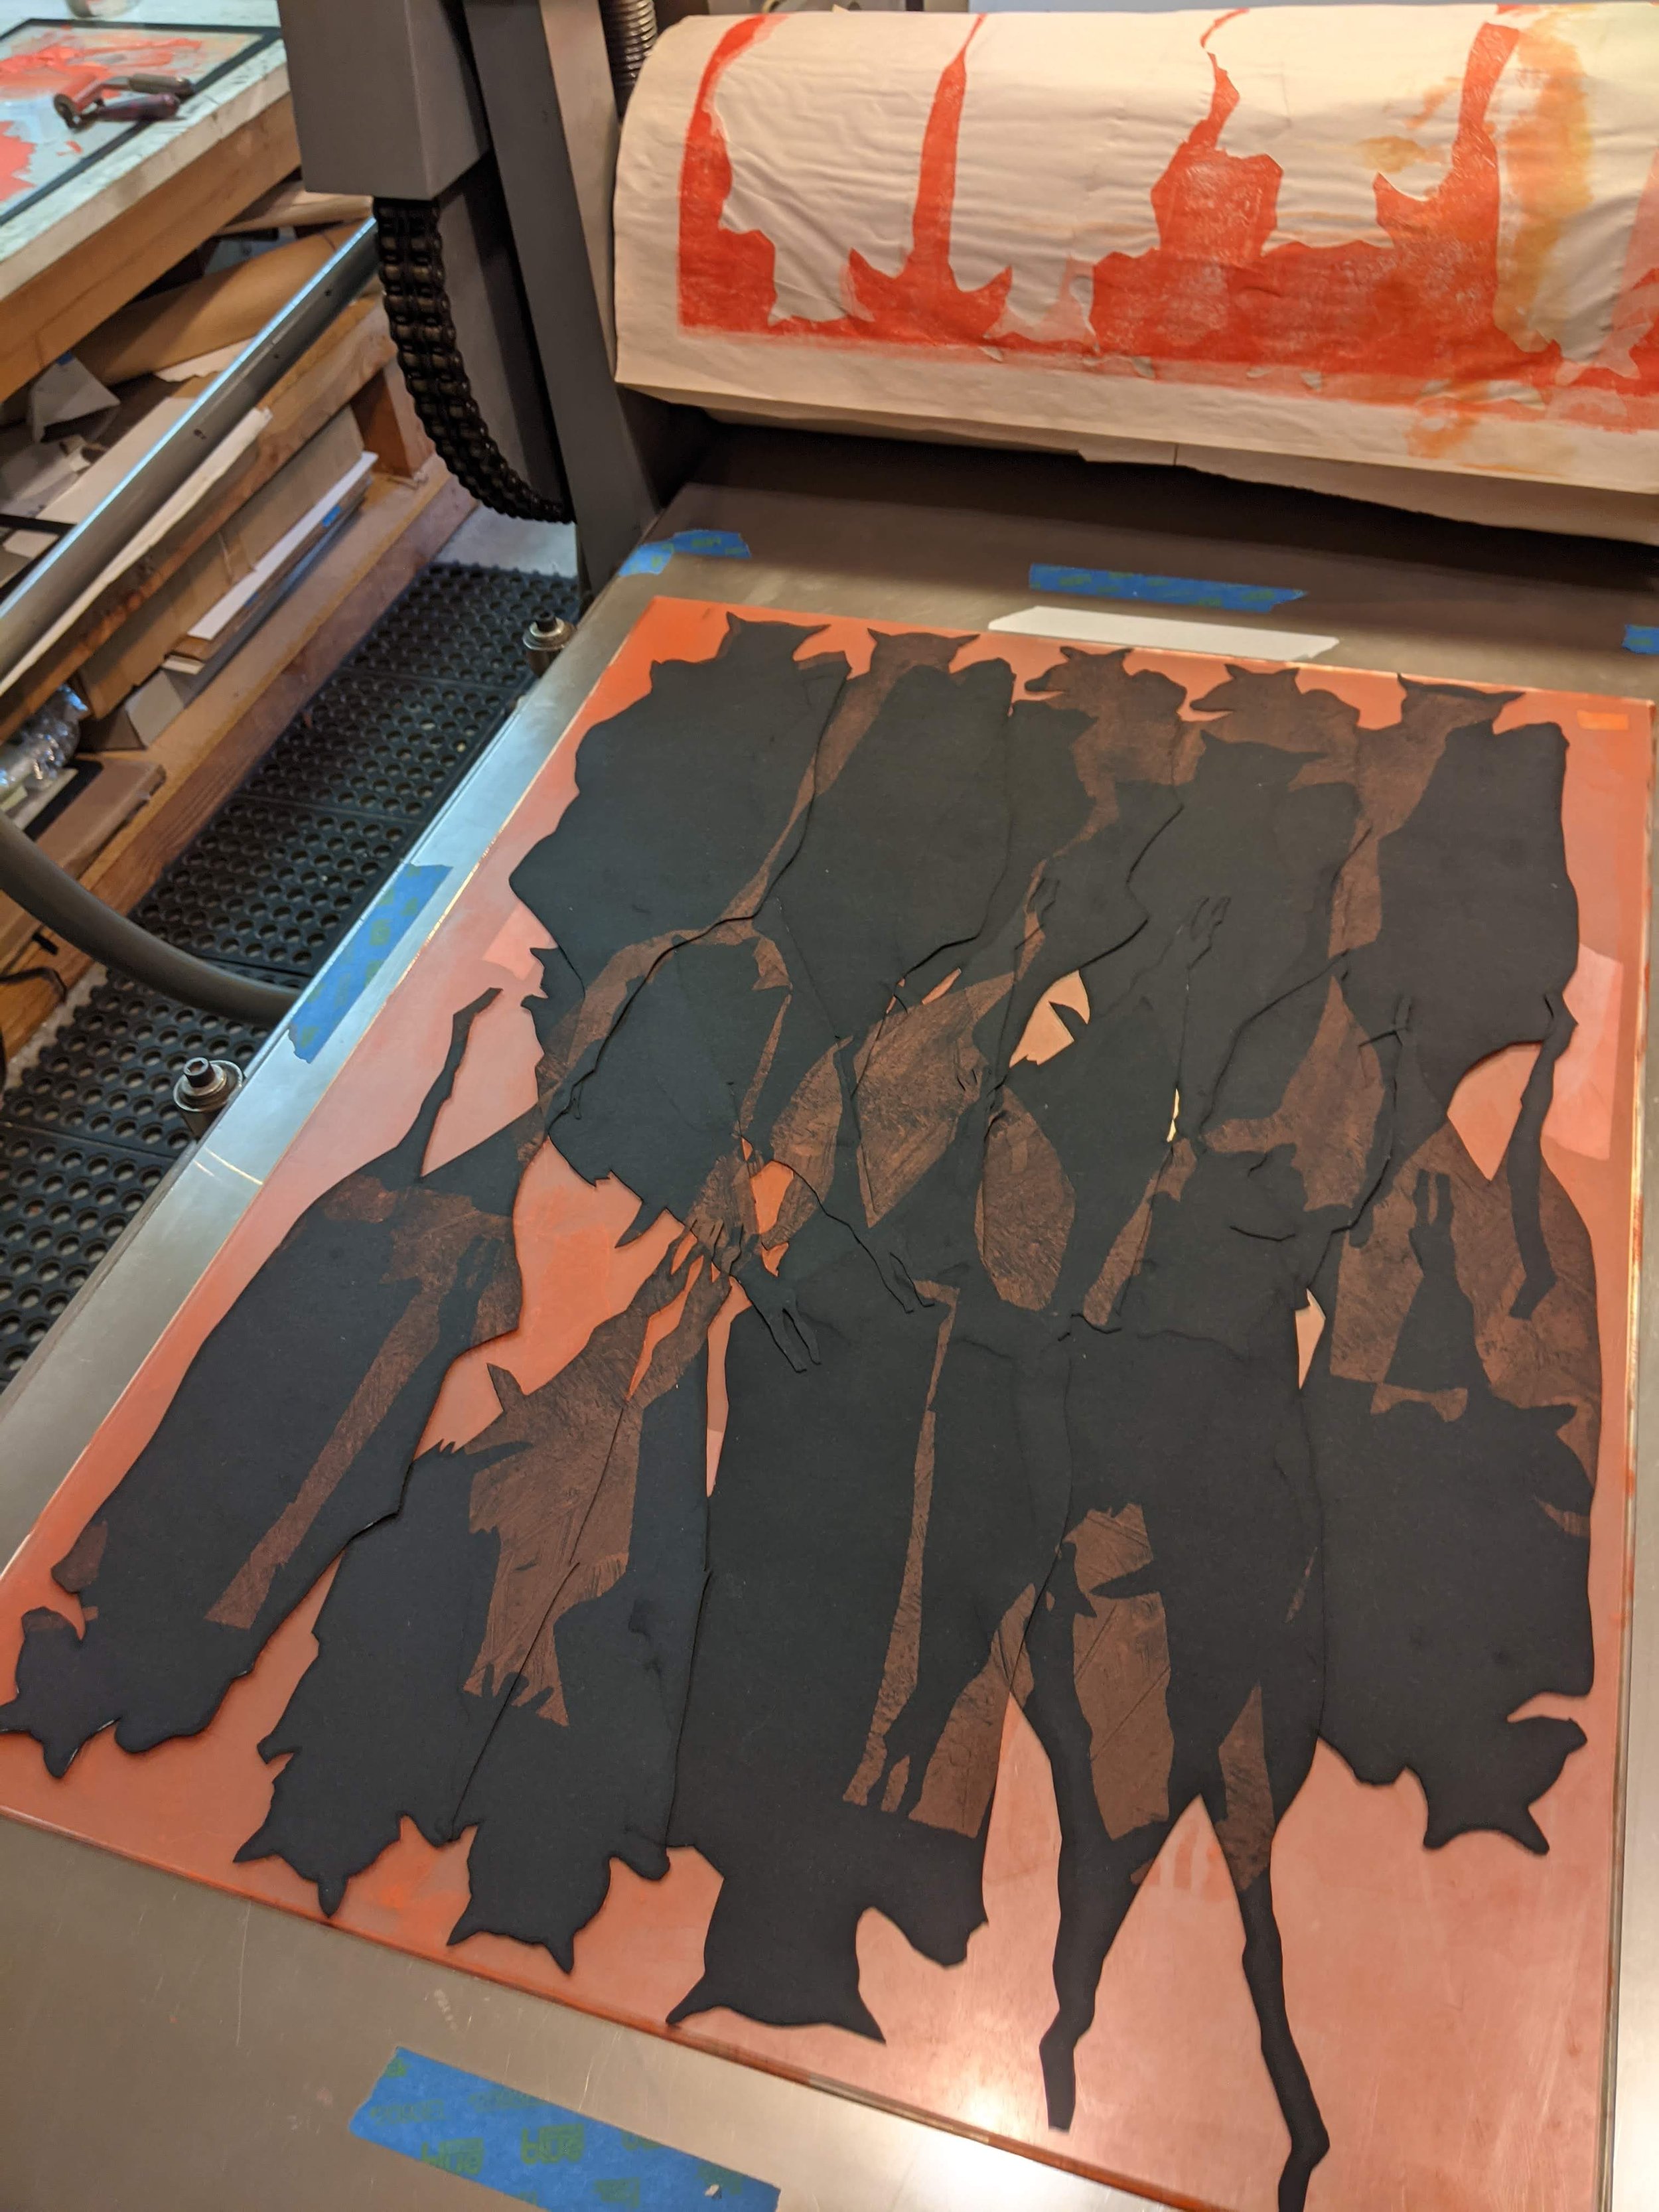 Work in Progress: current project printing on hand-cut paper bats 